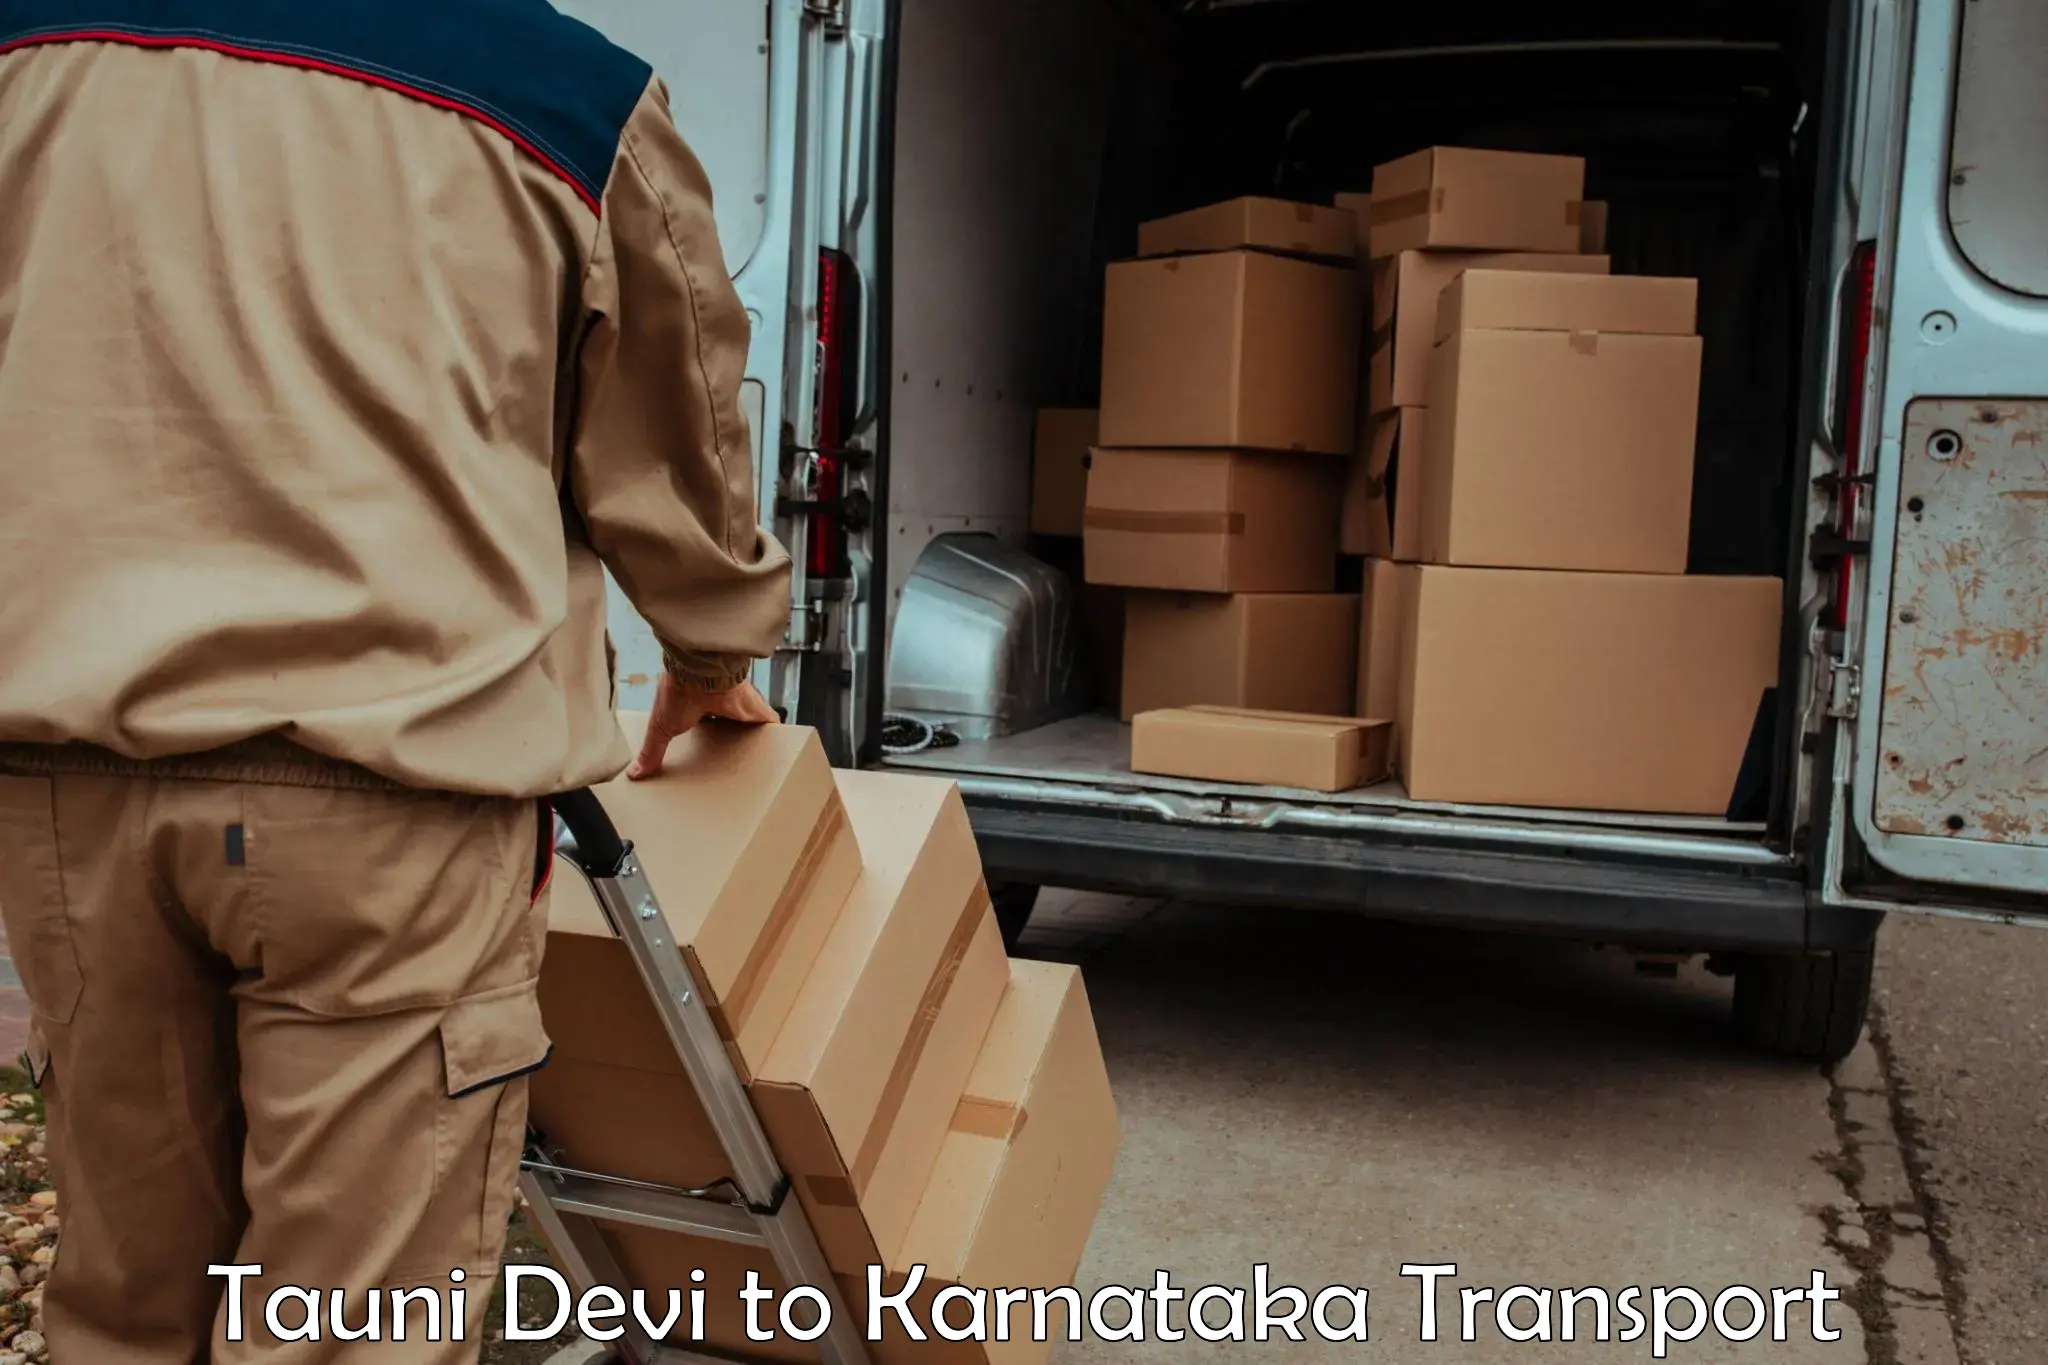 Express transport services in Tauni Devi to Bangalore